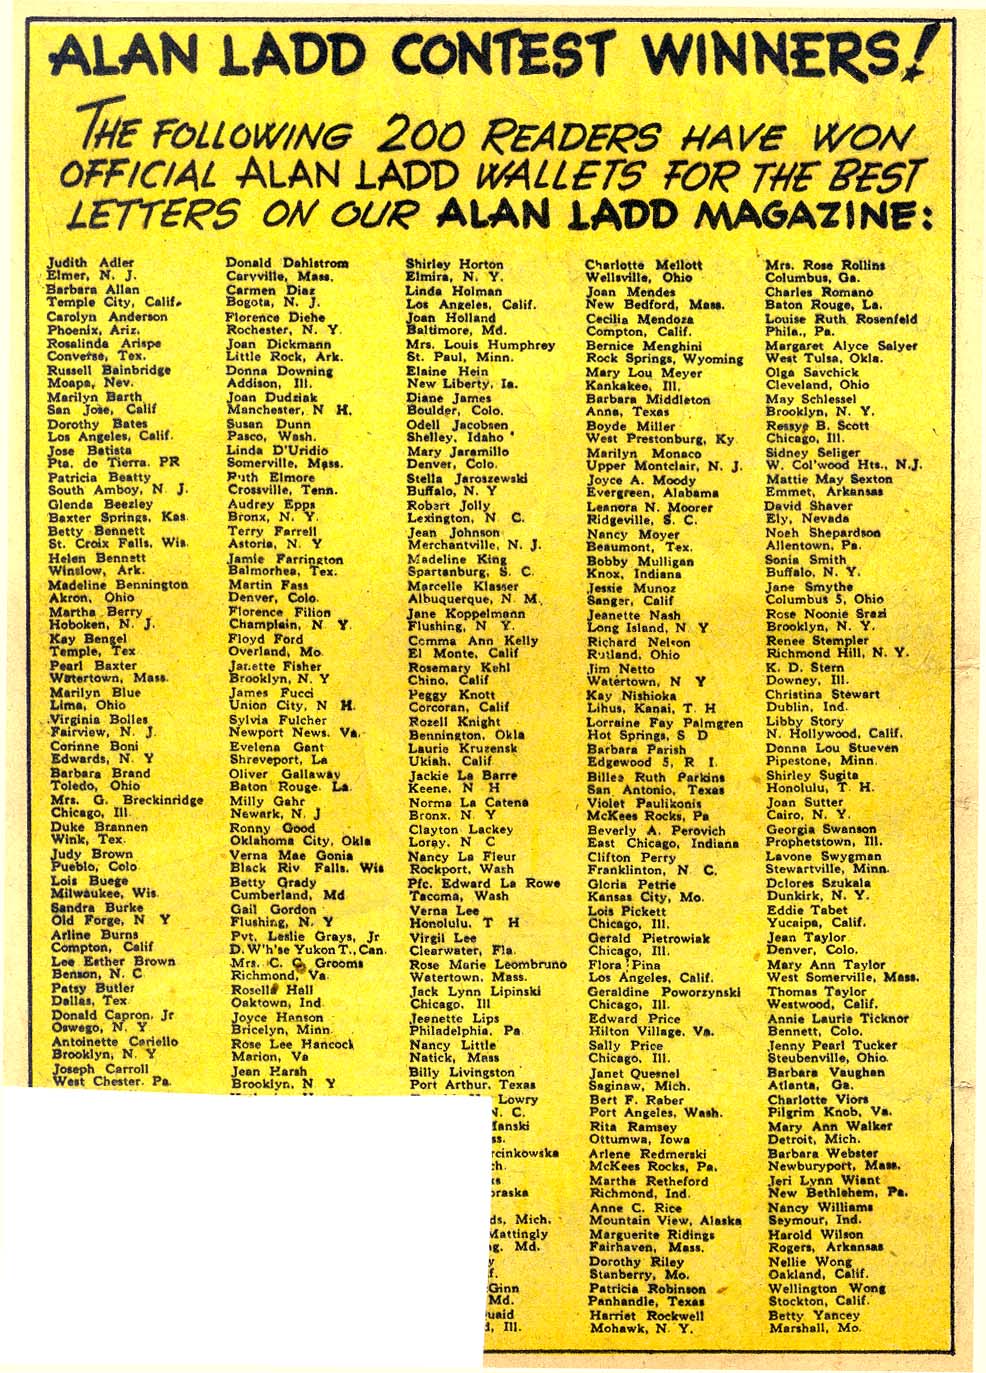 Read online Adventures of Alan Ladd comic -  Issue #4 - 16